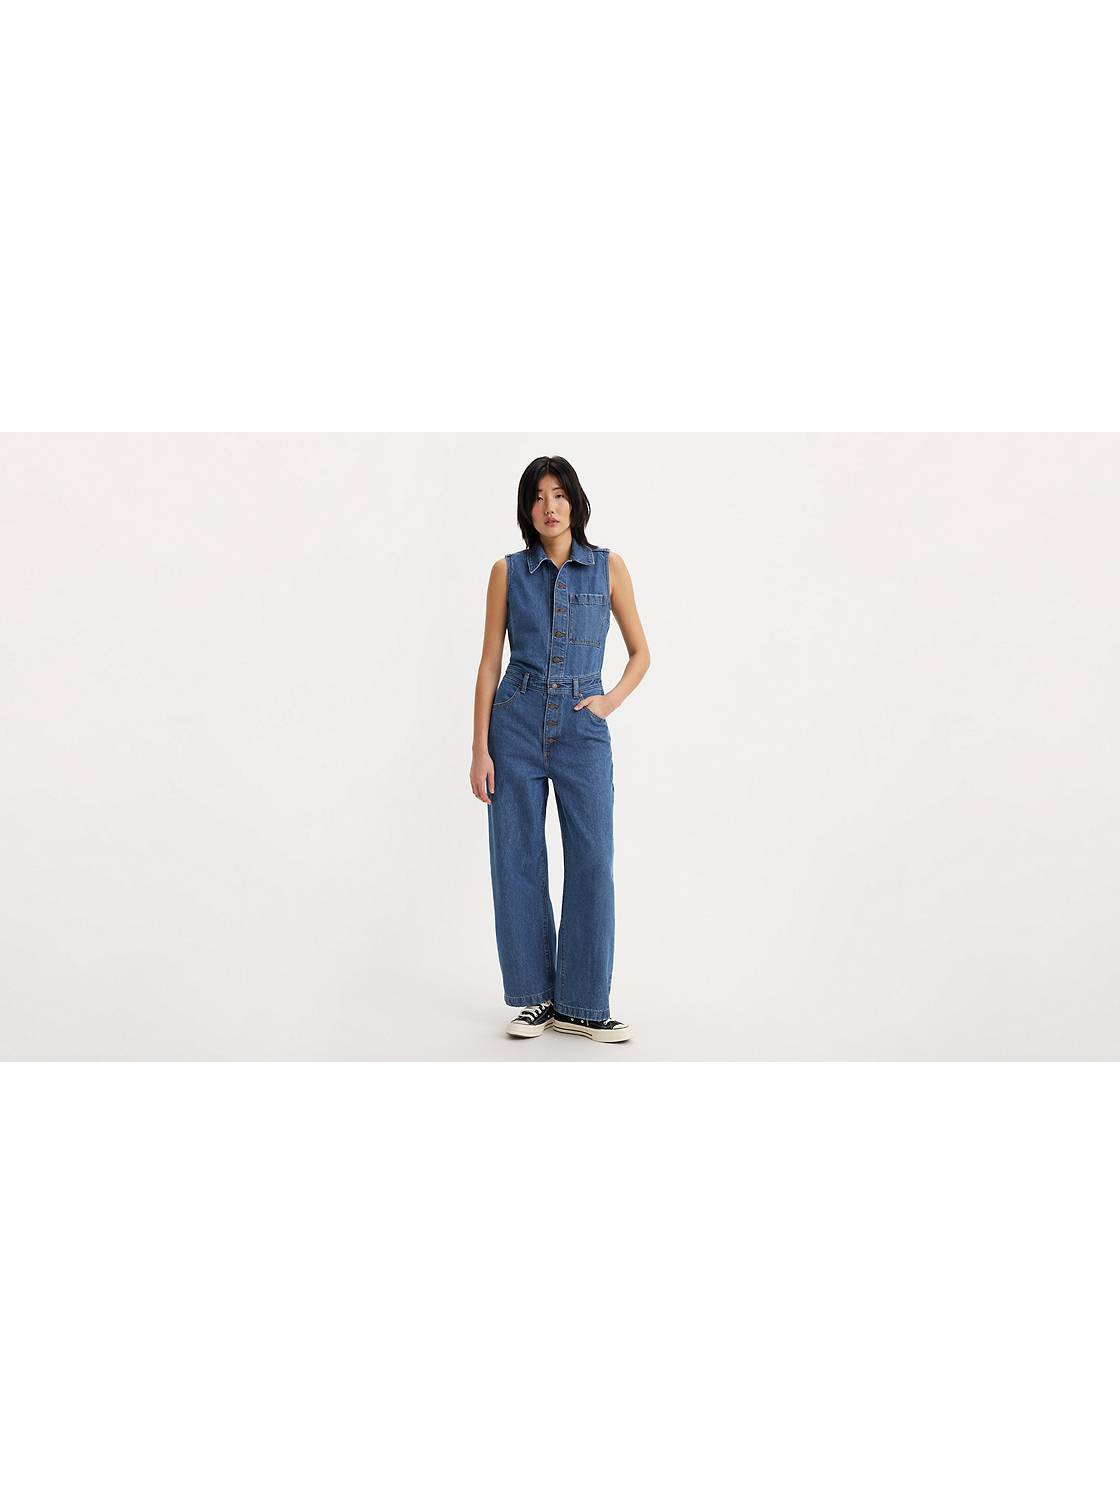 2023 Summer Overalls for Women Plus Size Fit Casual Cotton And Linen Loose  Dungarees Bib Pants with Pockets Sleeveless Dressy Jumpsuits Long Pants